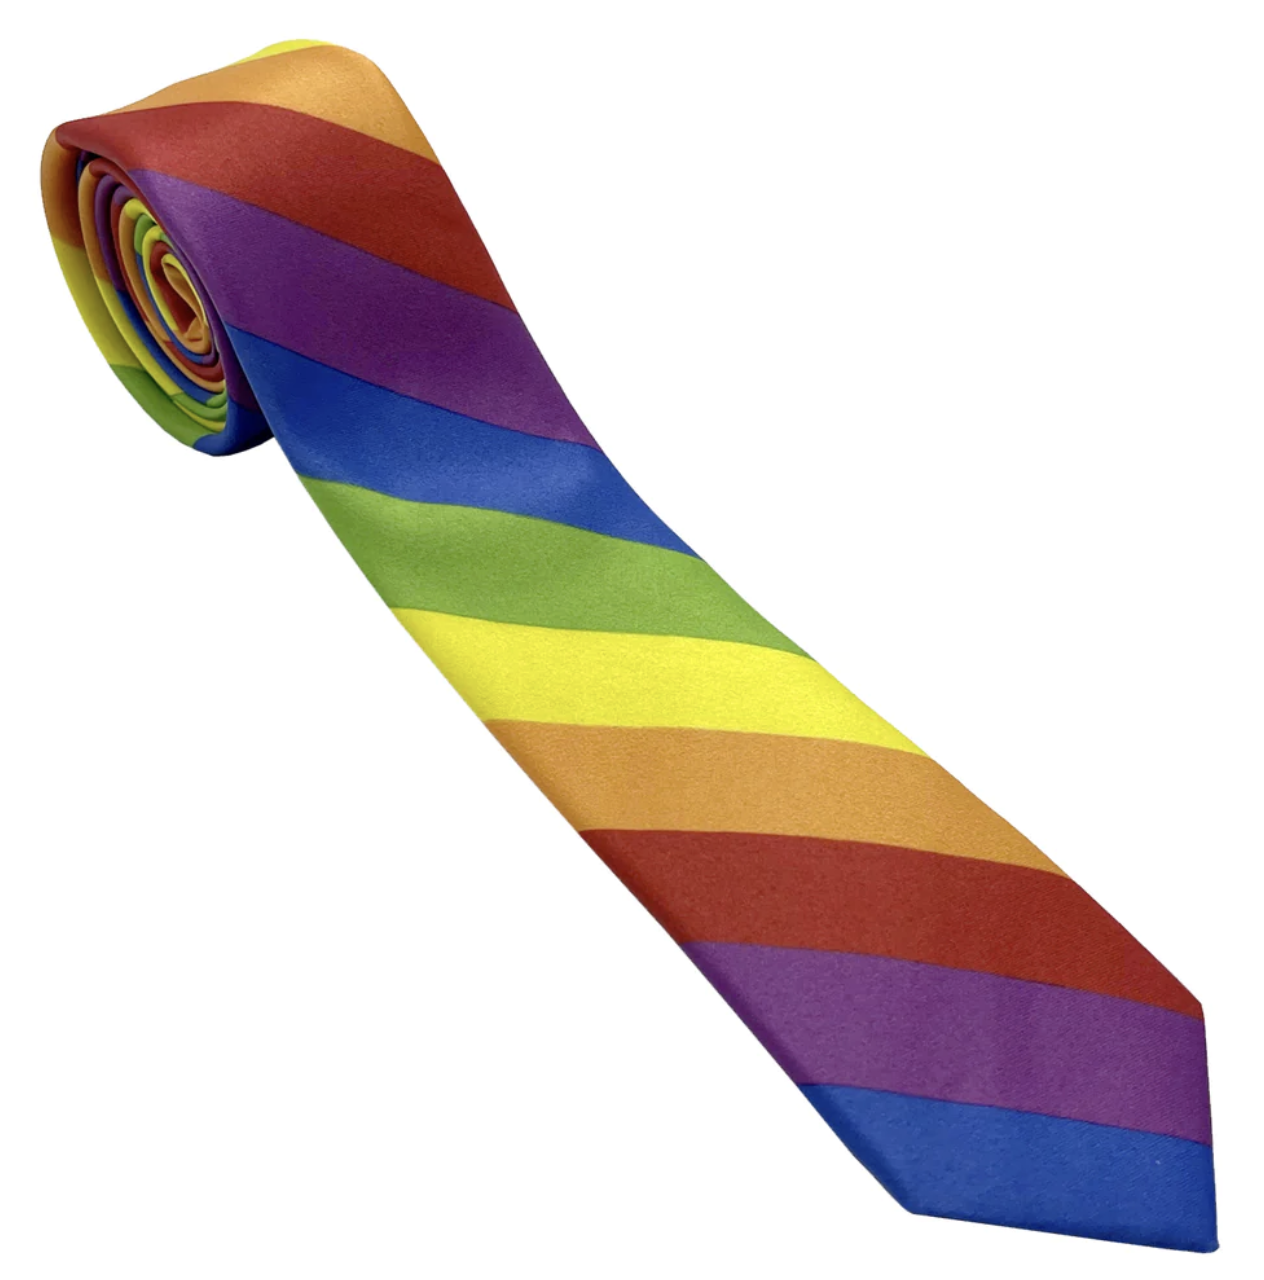 Micro Woven Polyester Ties